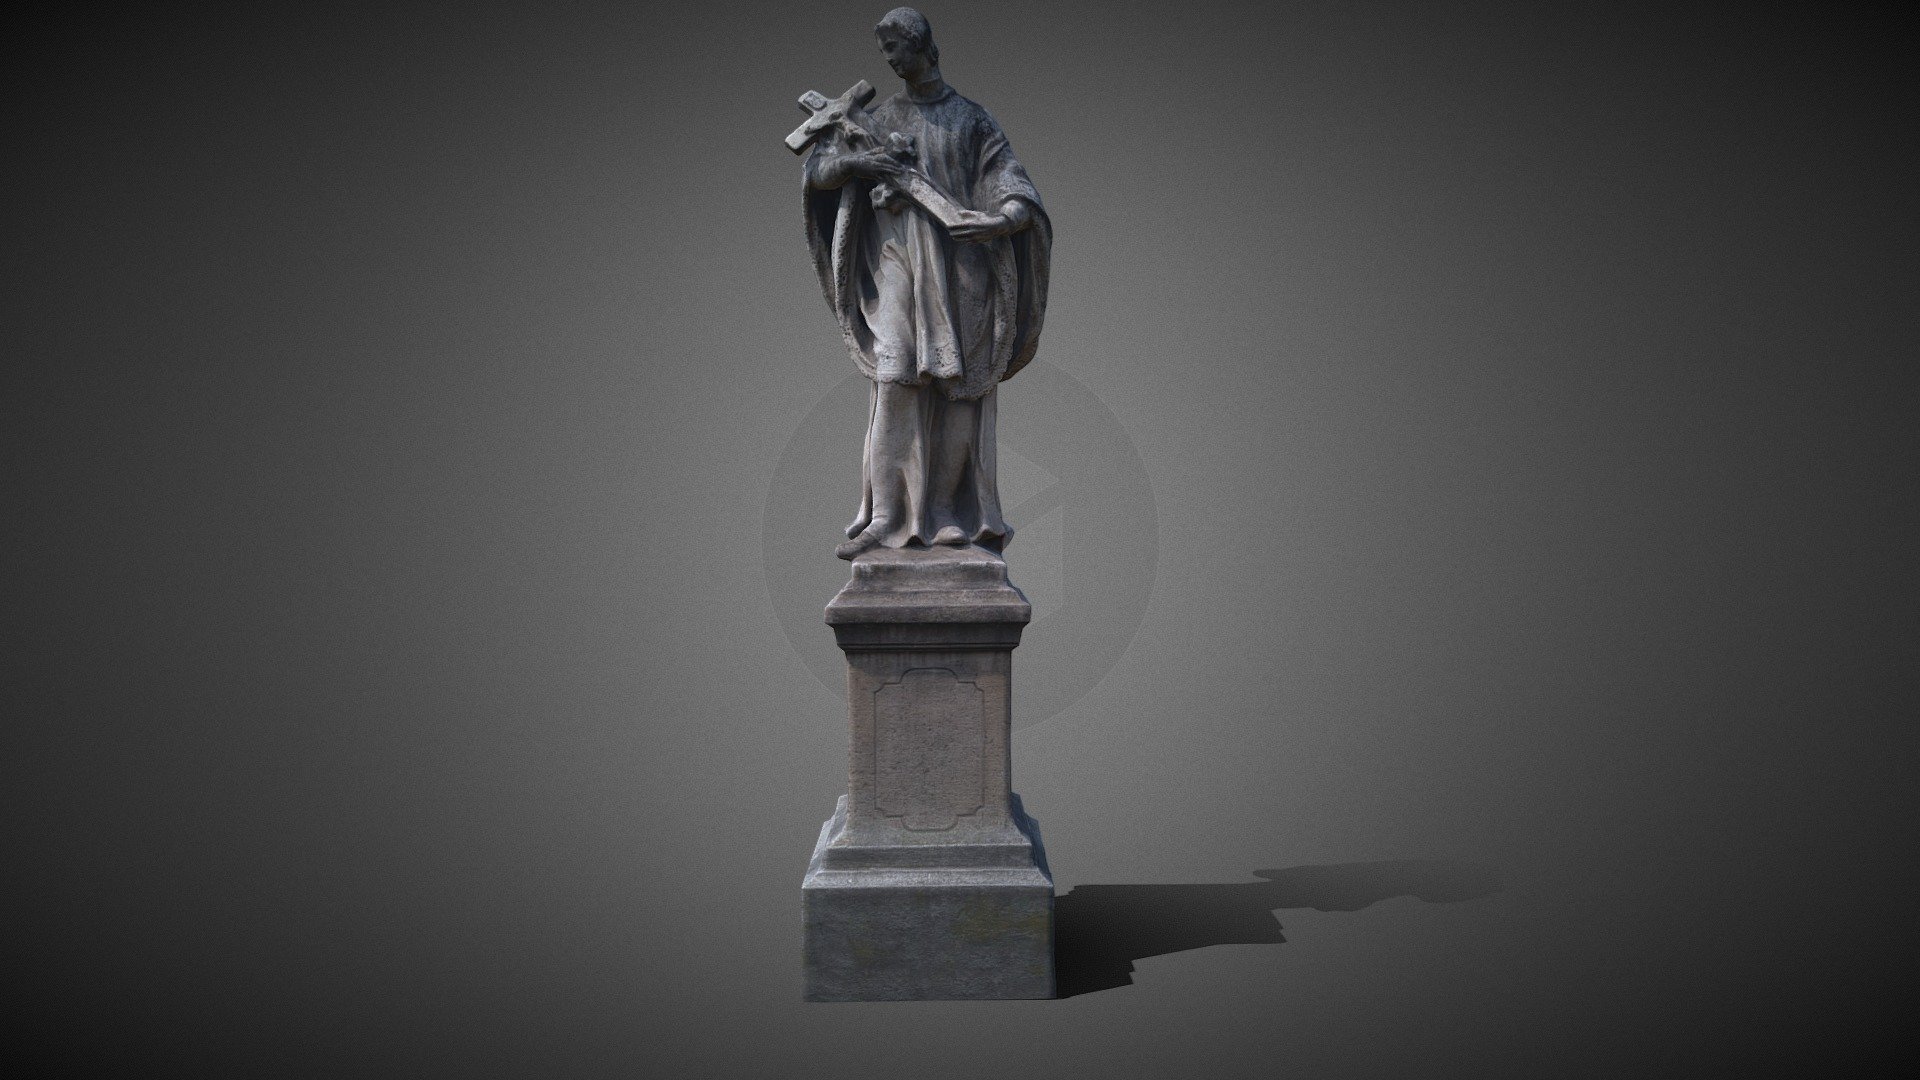 !!! New MODELS &amp; SALES at: https://www.bonboniere3d.com/ only !!!

3D Model Specifications

Geometry: Polygonal Quads/Tris

Polygons: 19,665

Vertices: 18,934

Materials: Vray + Standart

Textures: 1 x Variations

Rigged: No

Animated: No

UV Mapped: No

Unwrapped UVs: Yes - 3D Scan Sculpture 009 - Buy Royalty Free 3D model by bonboniere3d (@office) 3d model